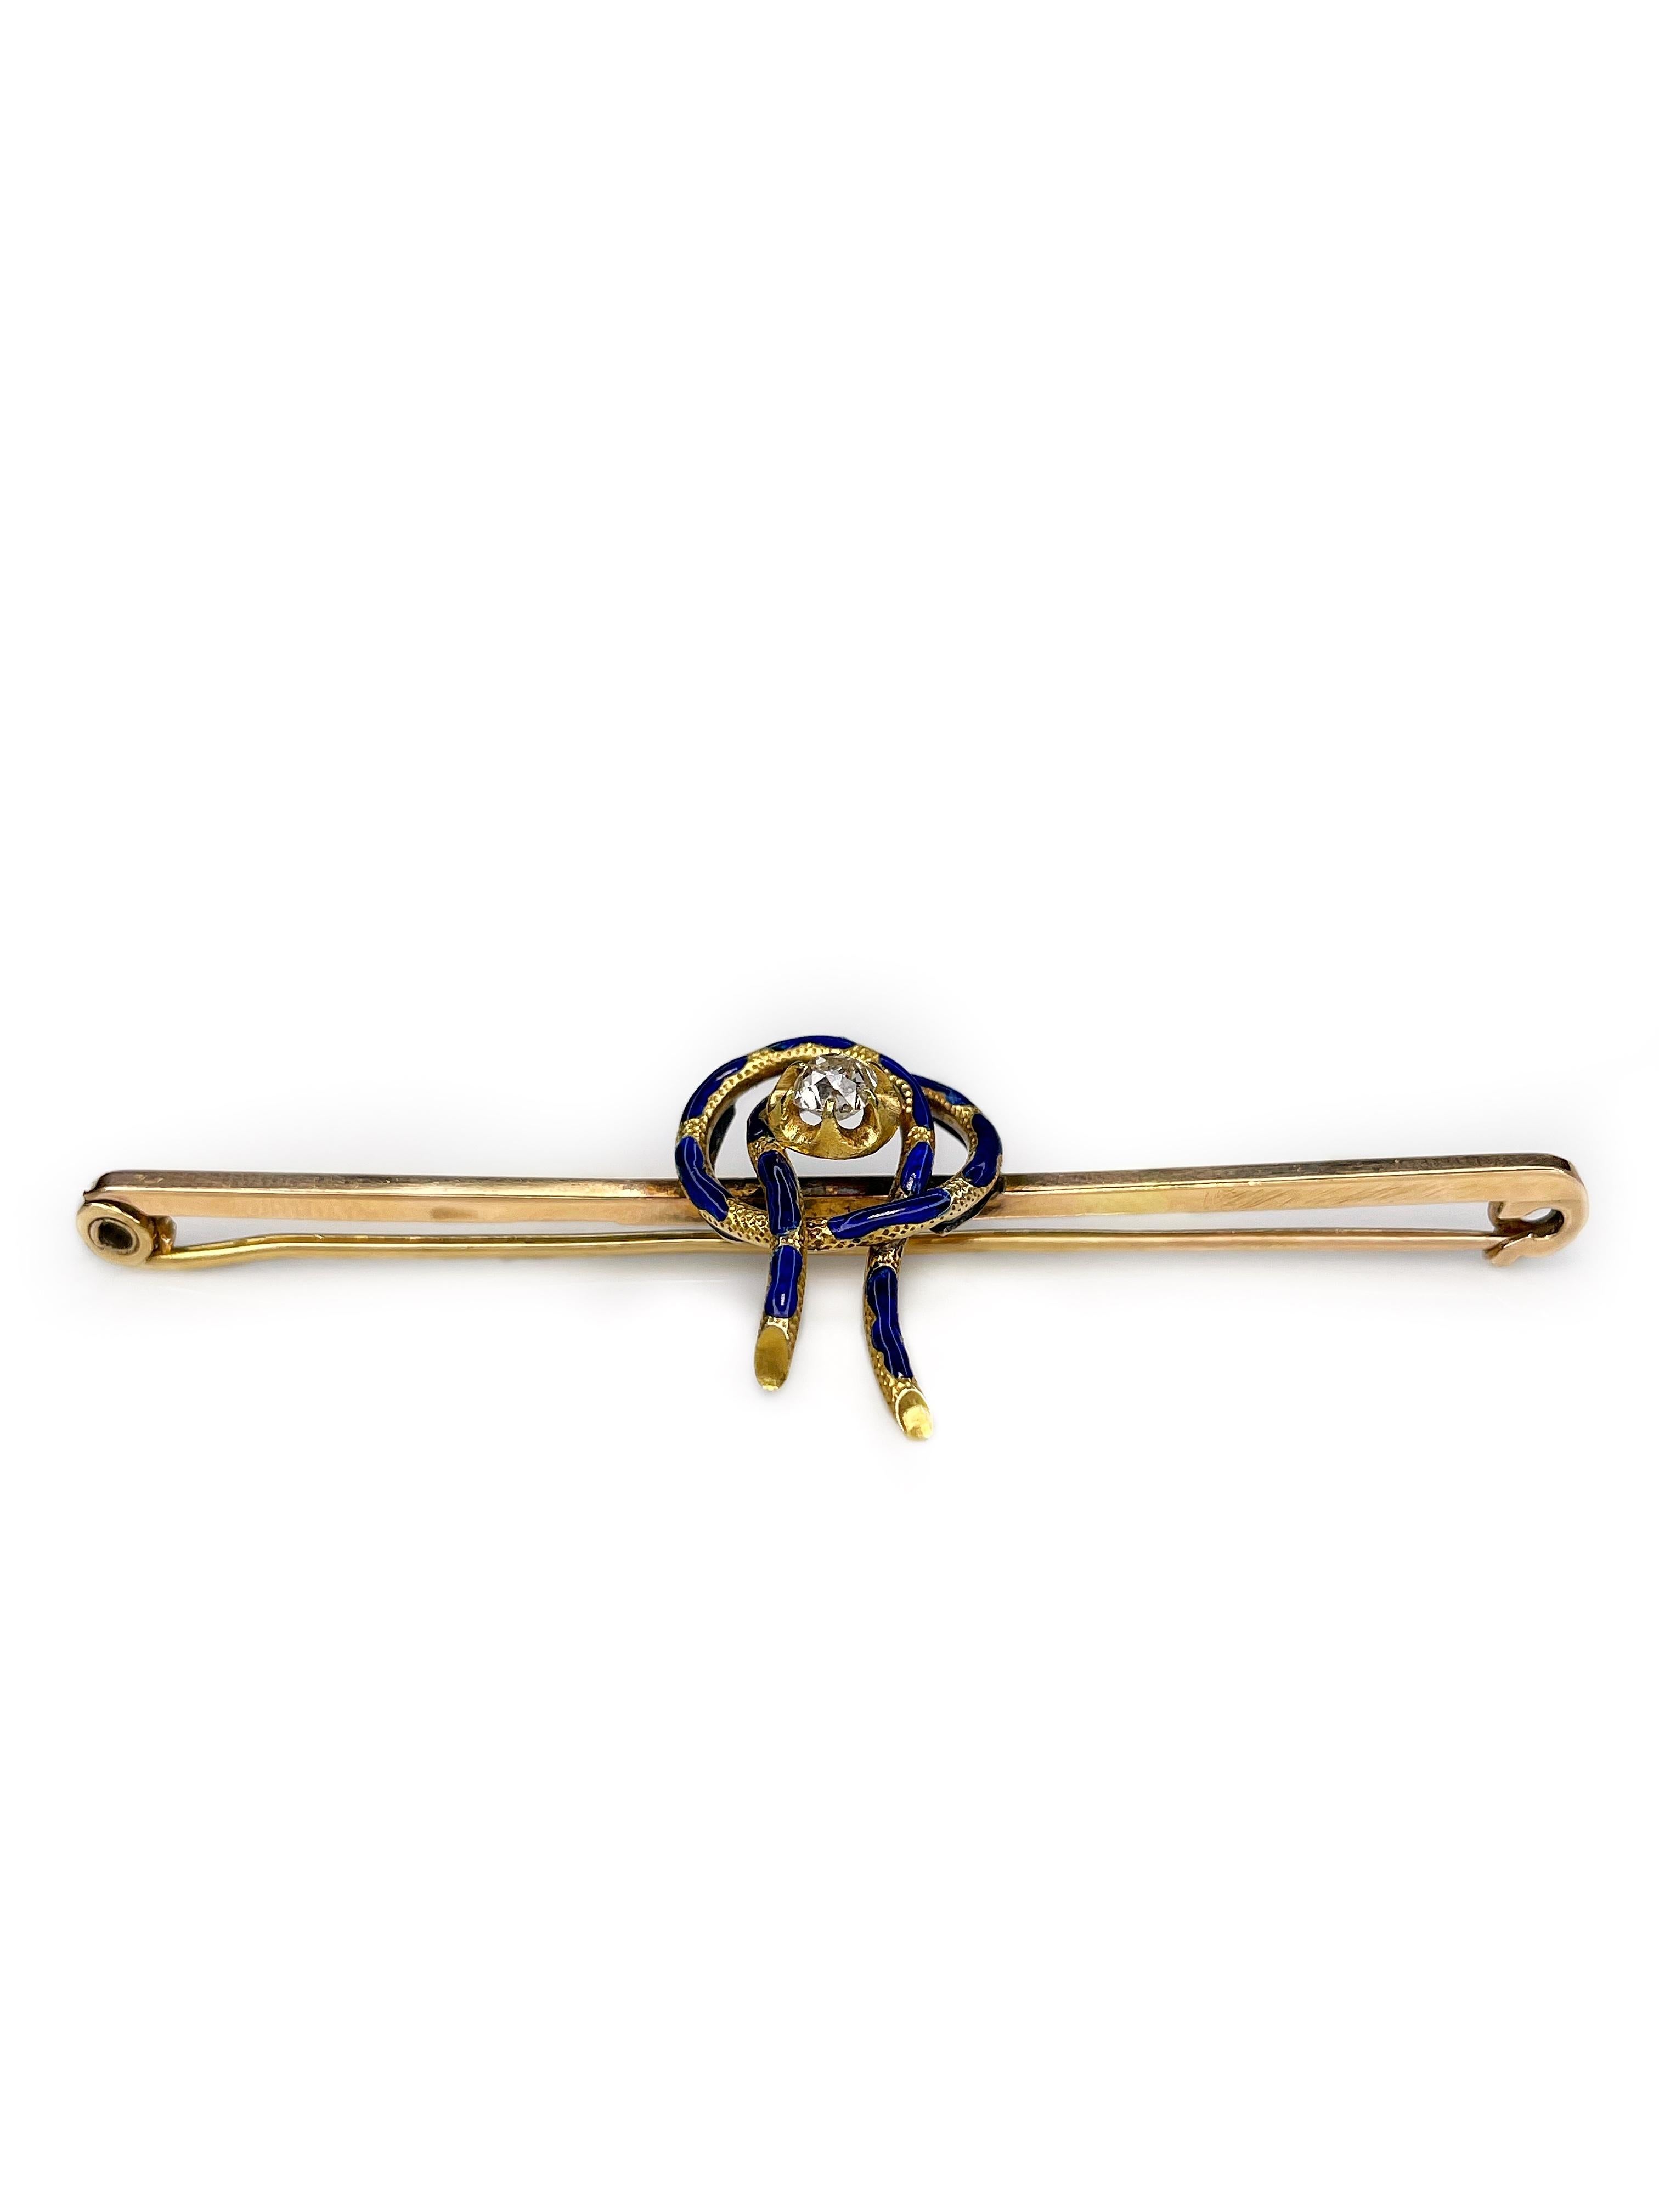 It is a beautiful antique bar brooch in 14K yellow gold. It features 0.23ct old cut diamond, which colour is W-STW and clarity - P1. Cobalt blue enamel is in perfect condition. 

There are hallmarks (shown in photos).

Weight: 6.57g
Size: 7x2.3cm